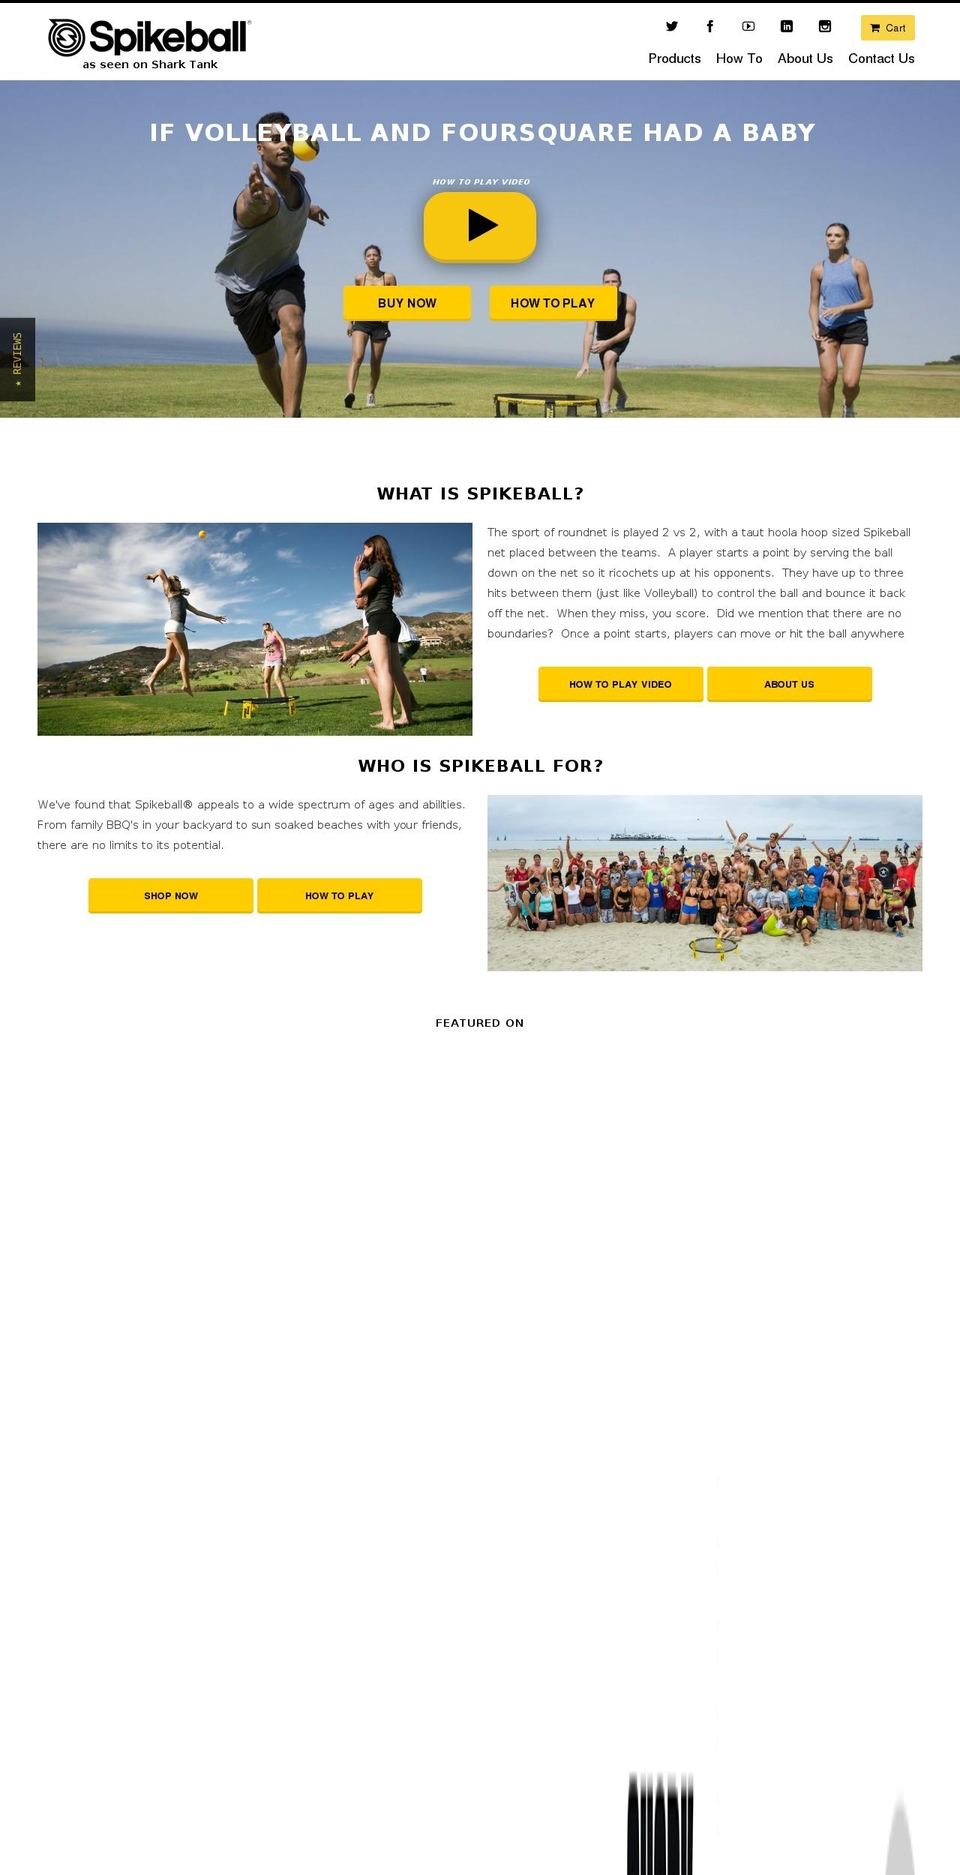 Spikeball.com Export Shopify theme site example spikeball.be